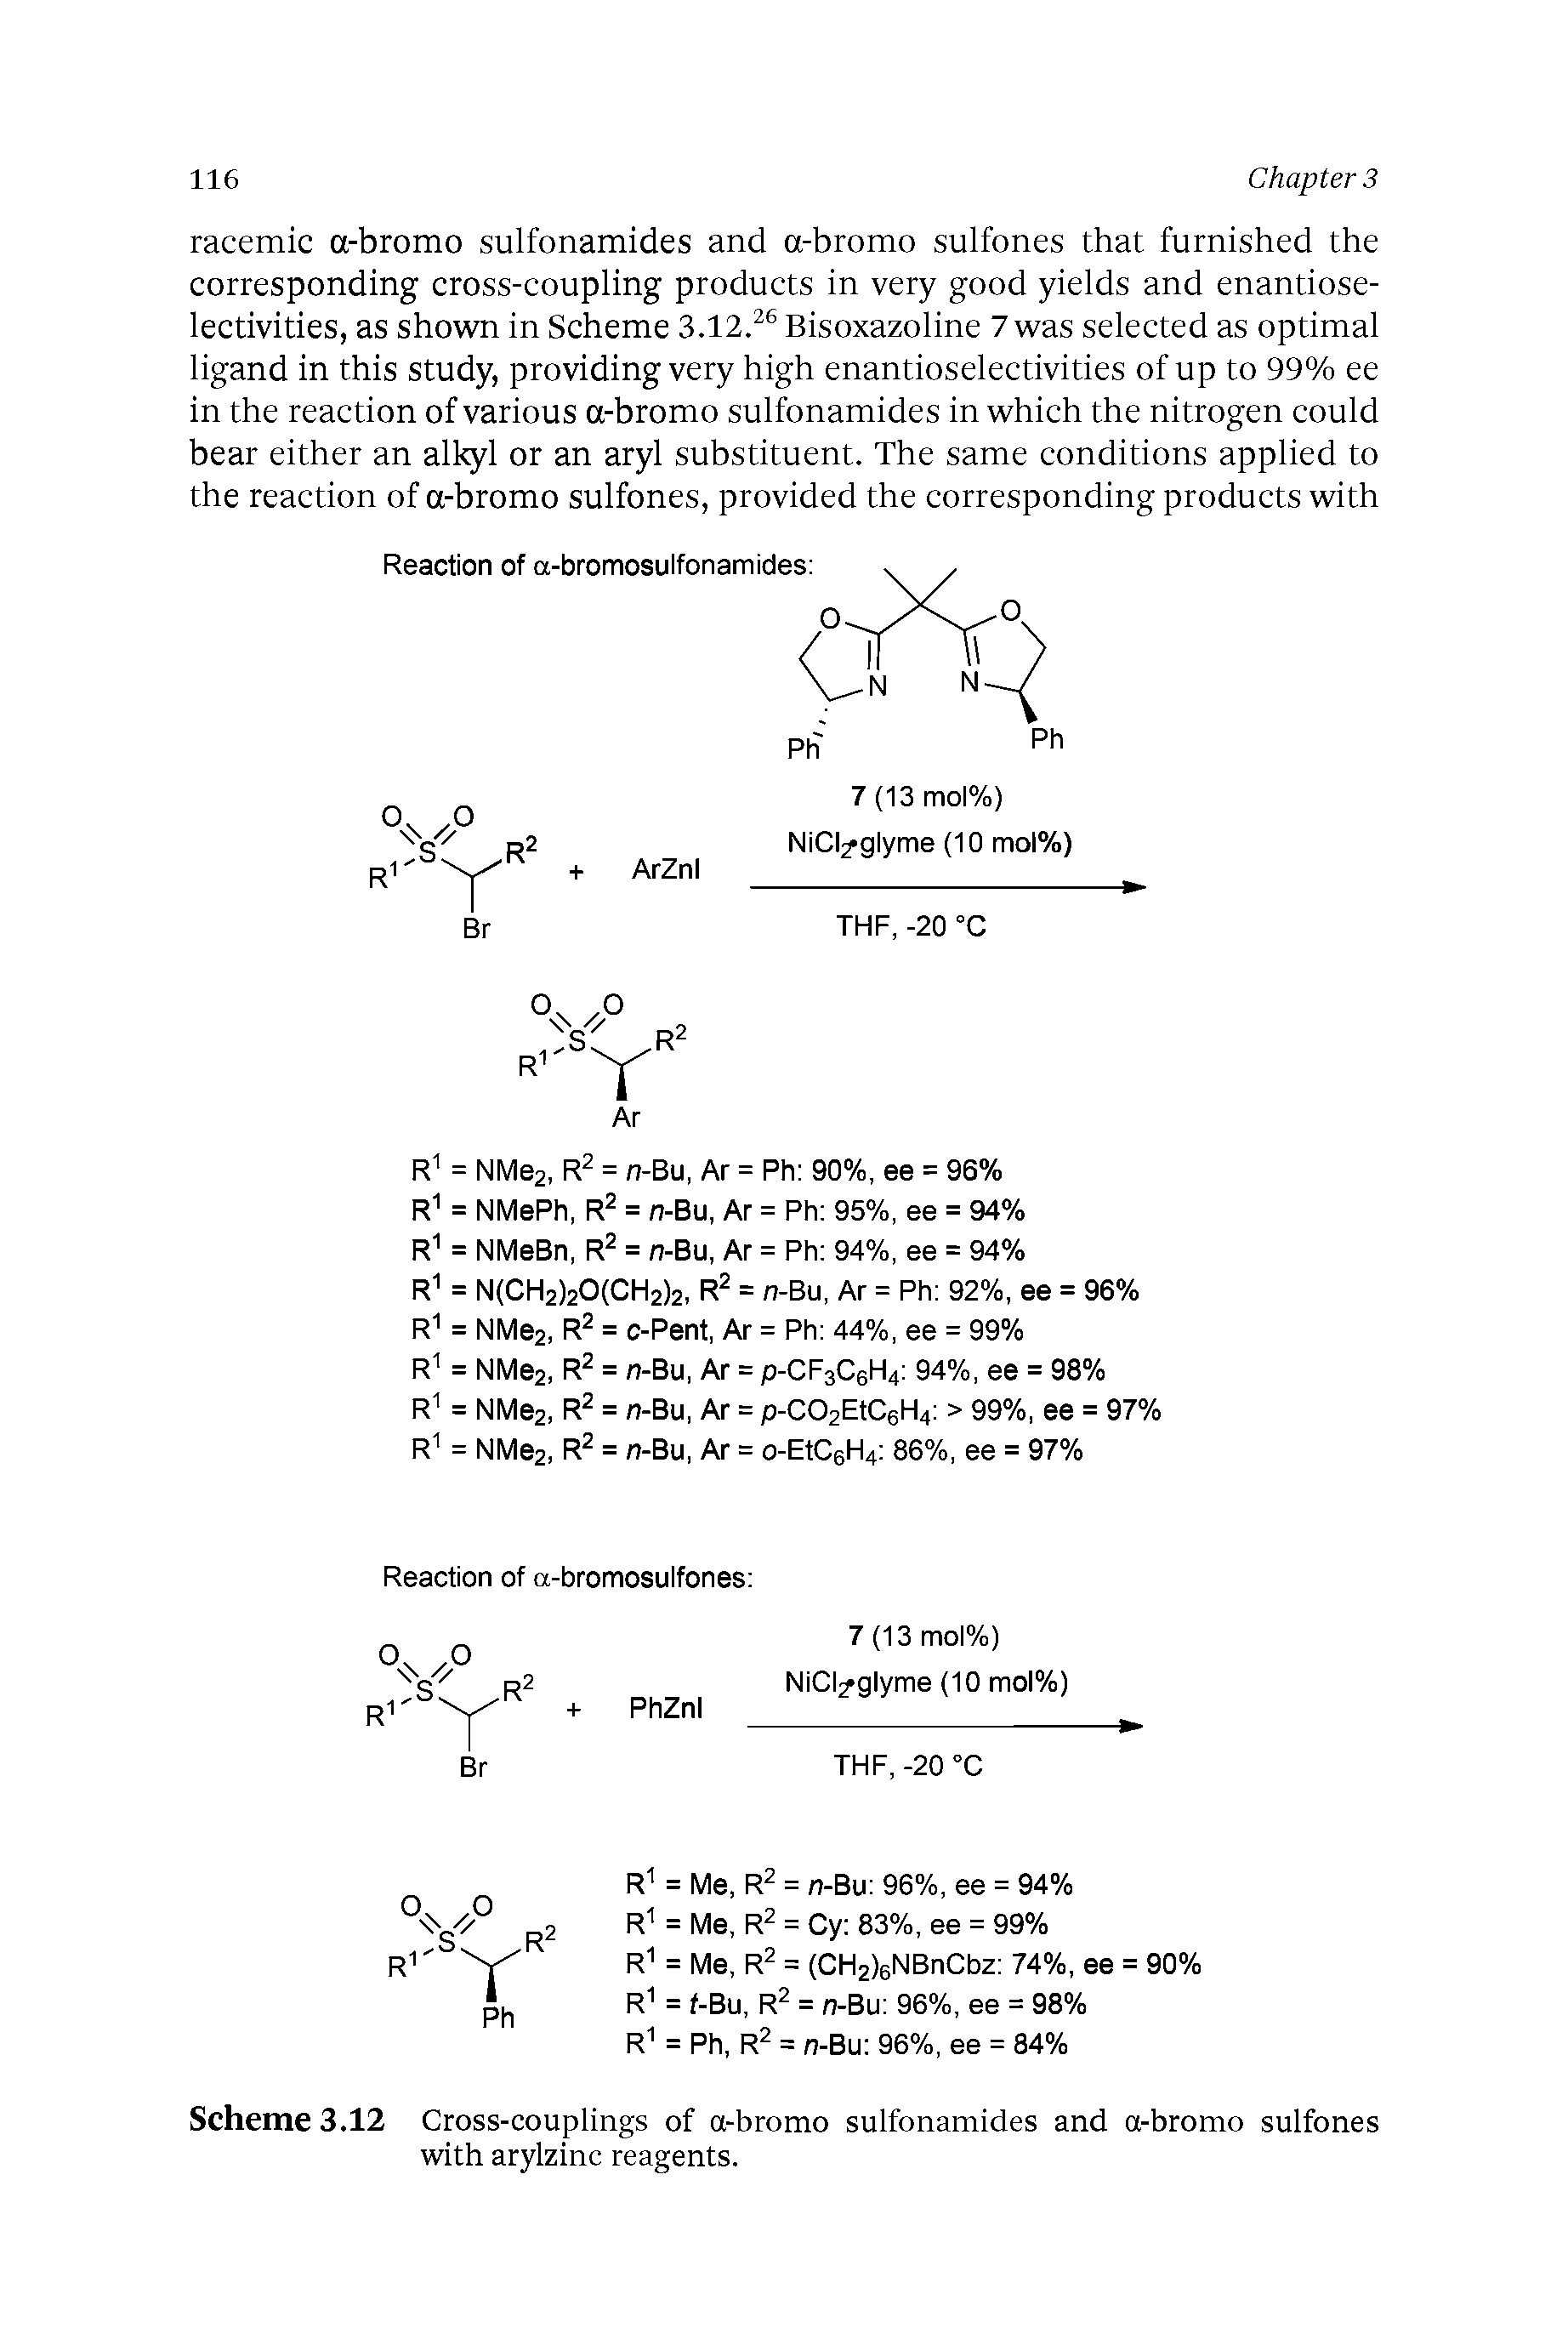 Scheme 3.12 Cross-couplings of a-bromo sulfonamides and a-bromo sulfones with arylzinc reagents.